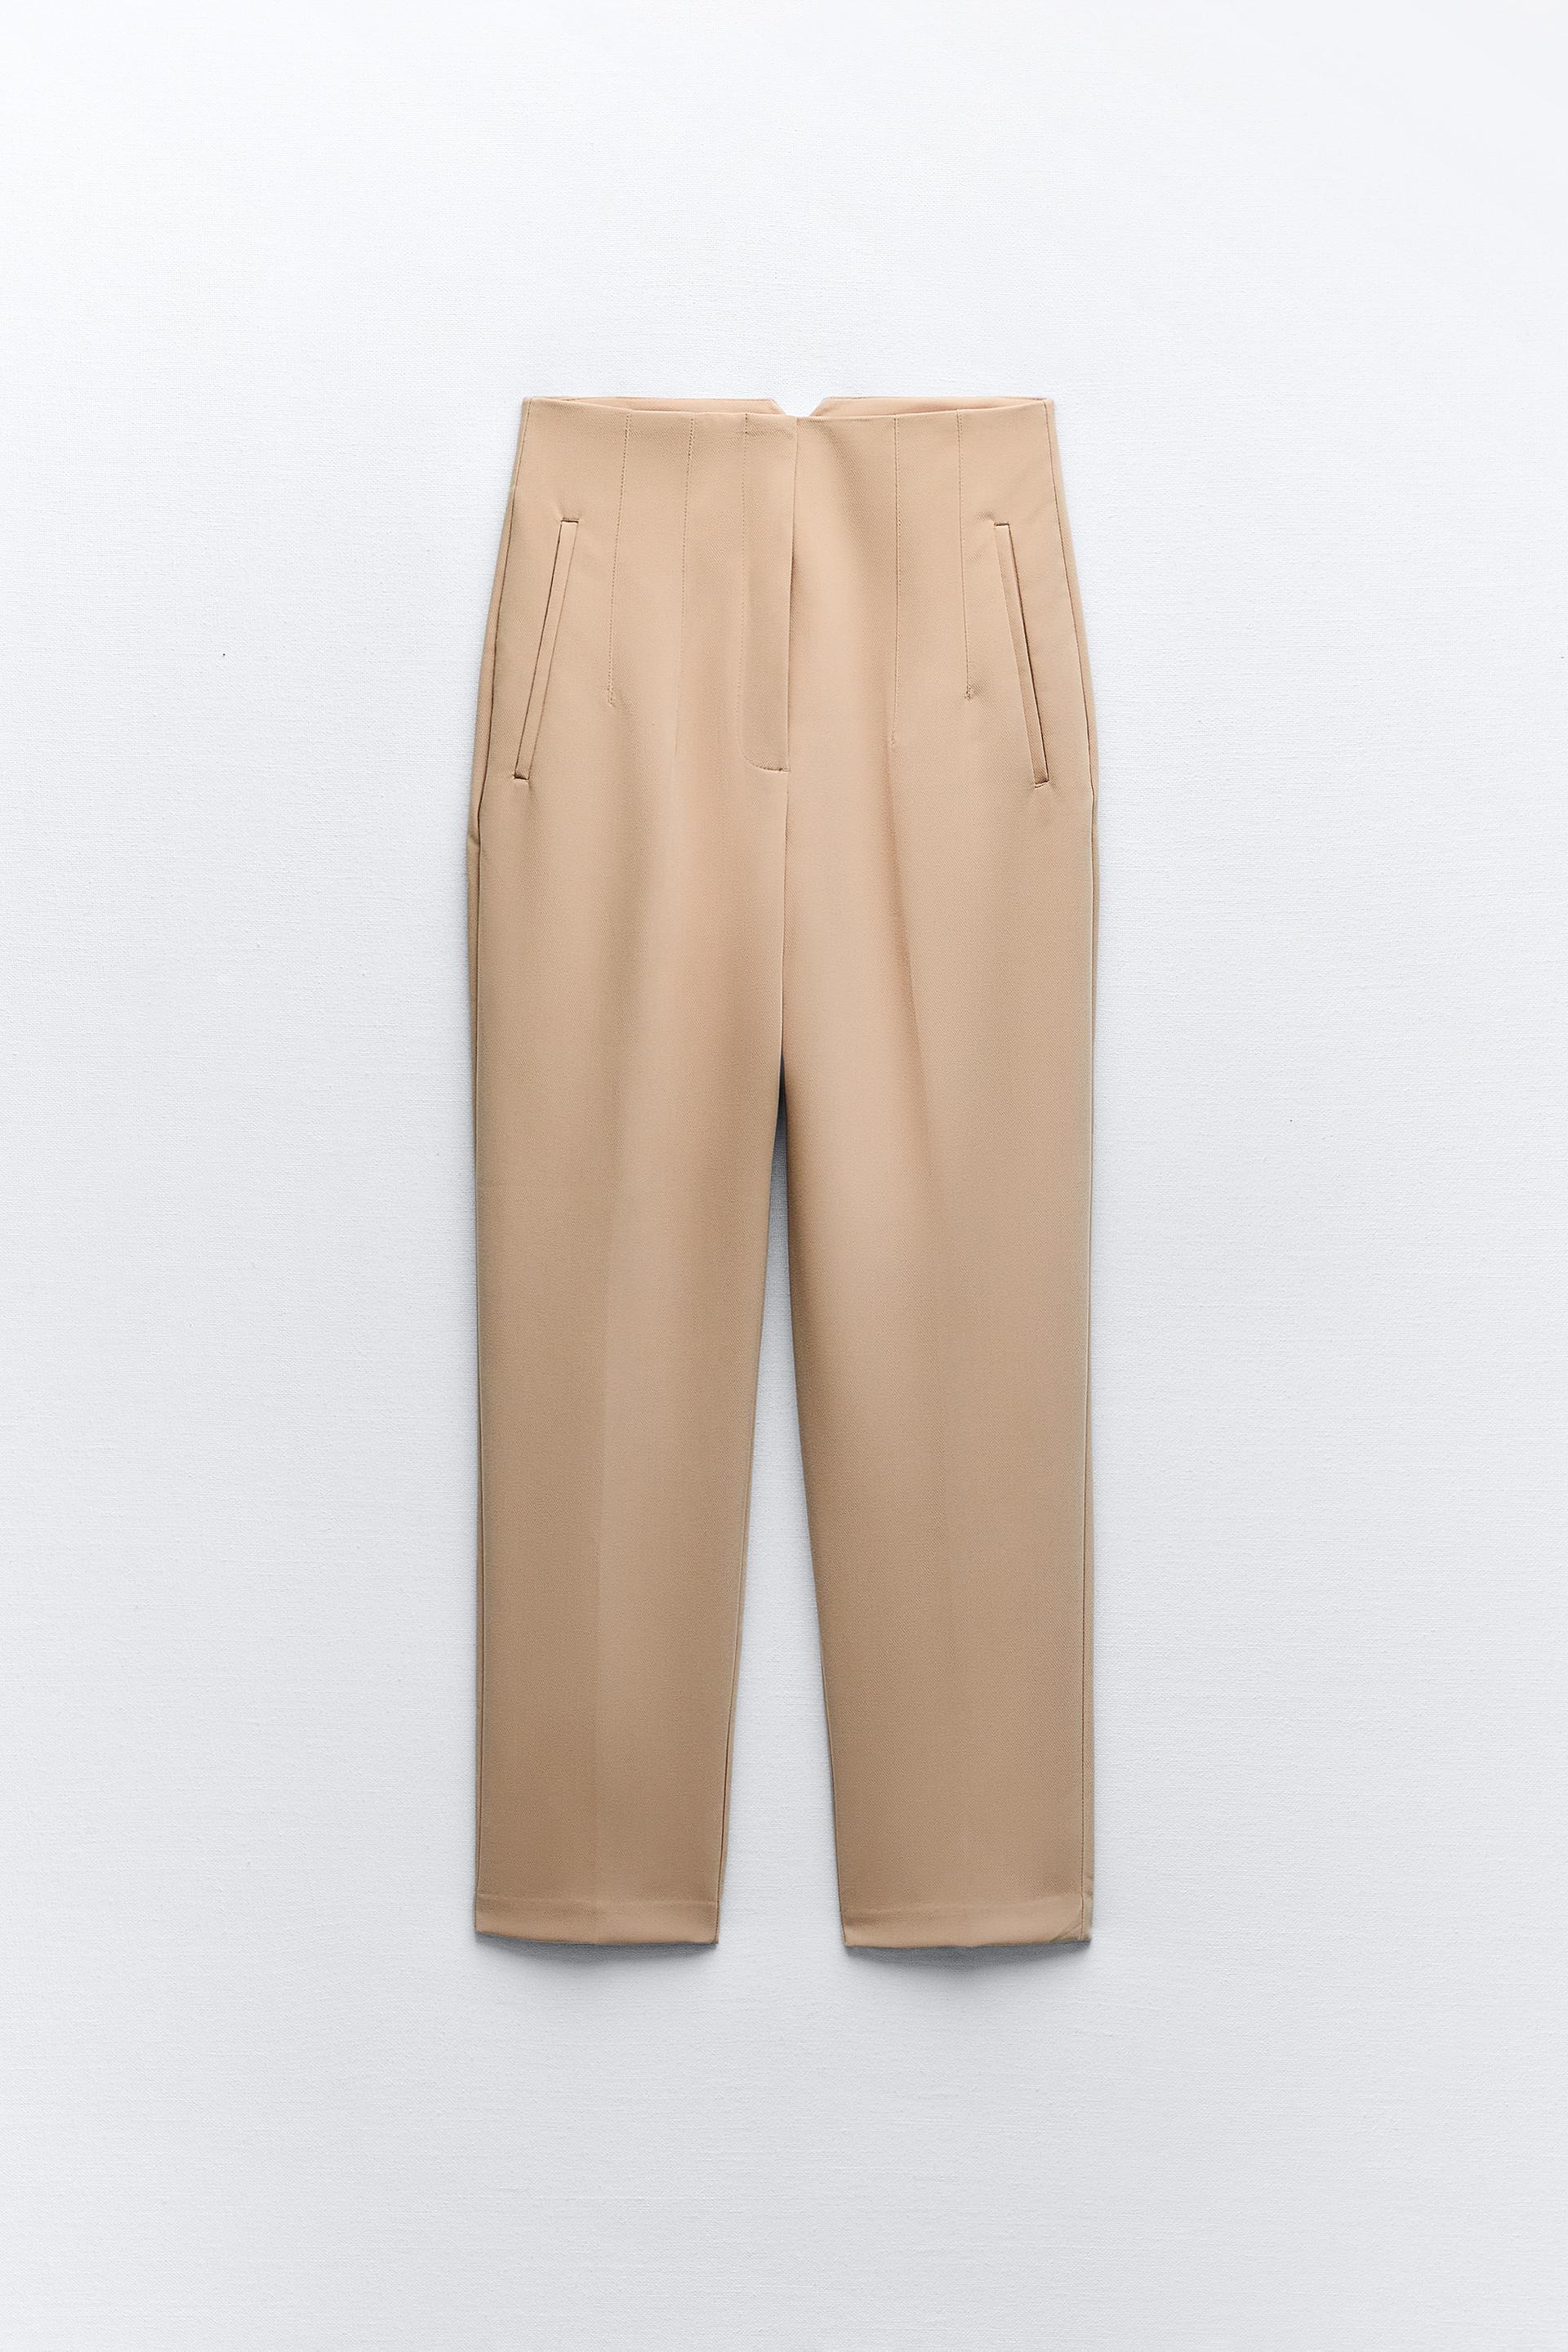 Zara Darted Trousers (High Waist Pants) Oyster White / Sand